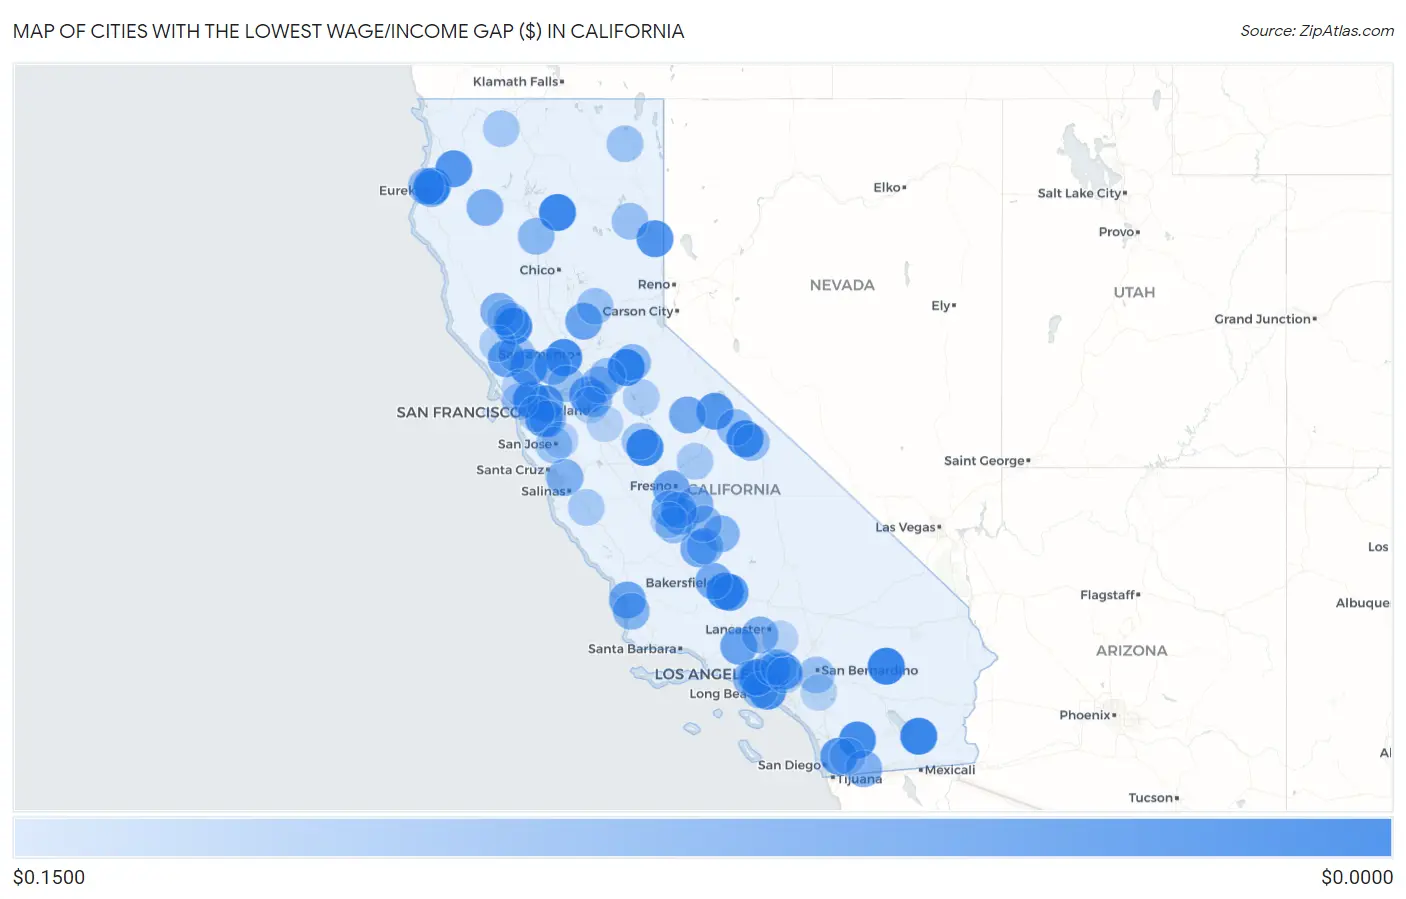 Cities with the Lowest Wage/Income Gap ($) in California Map